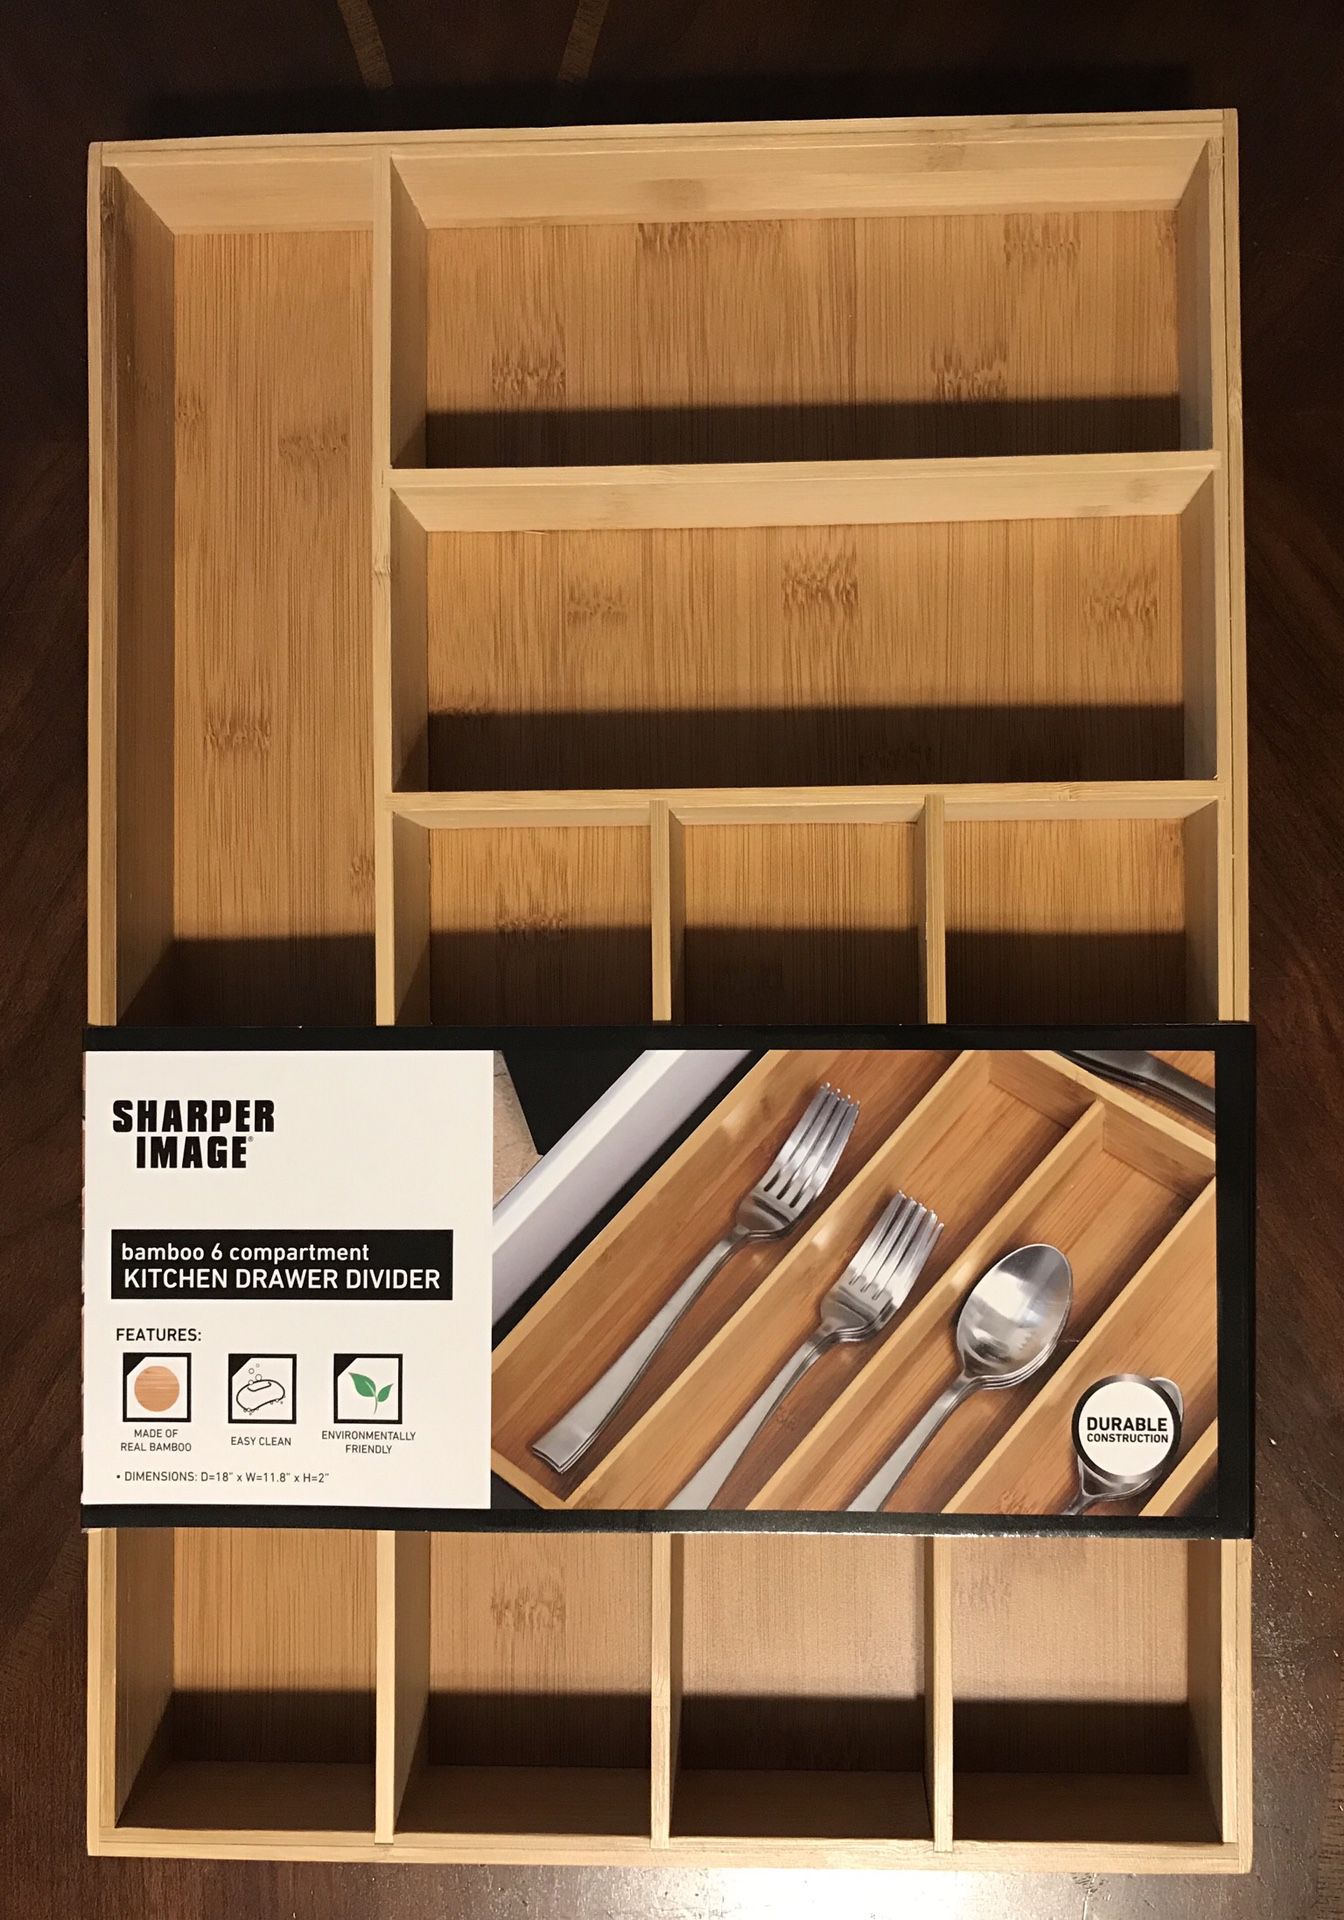 BAMBOO 6 COMPARTMENT KITCHEN DRAWER DIVIDER PICK UP IN MEBANE NC